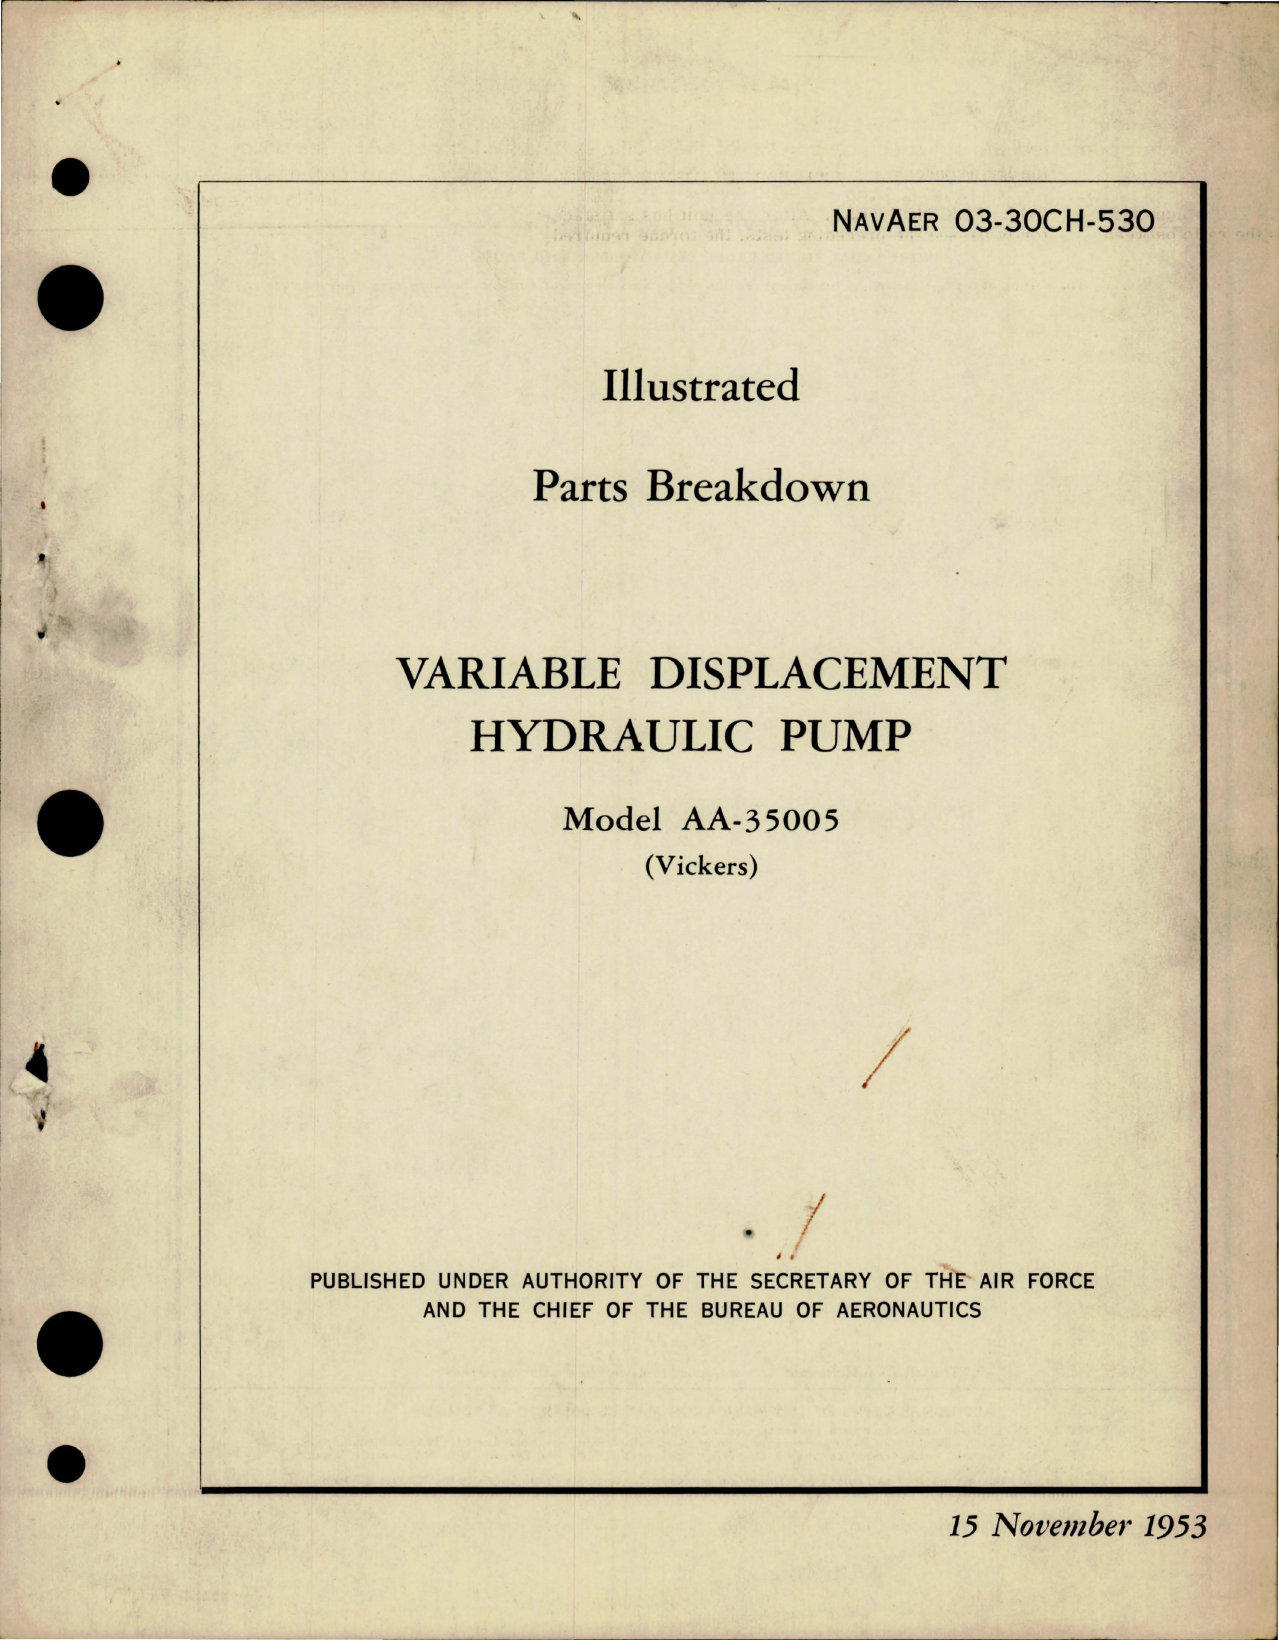 Sample page 1 from AirCorps Library document: Illustrated Parts Breakdown for Variable Displacement Hydraulic Pump - Model AA-35005